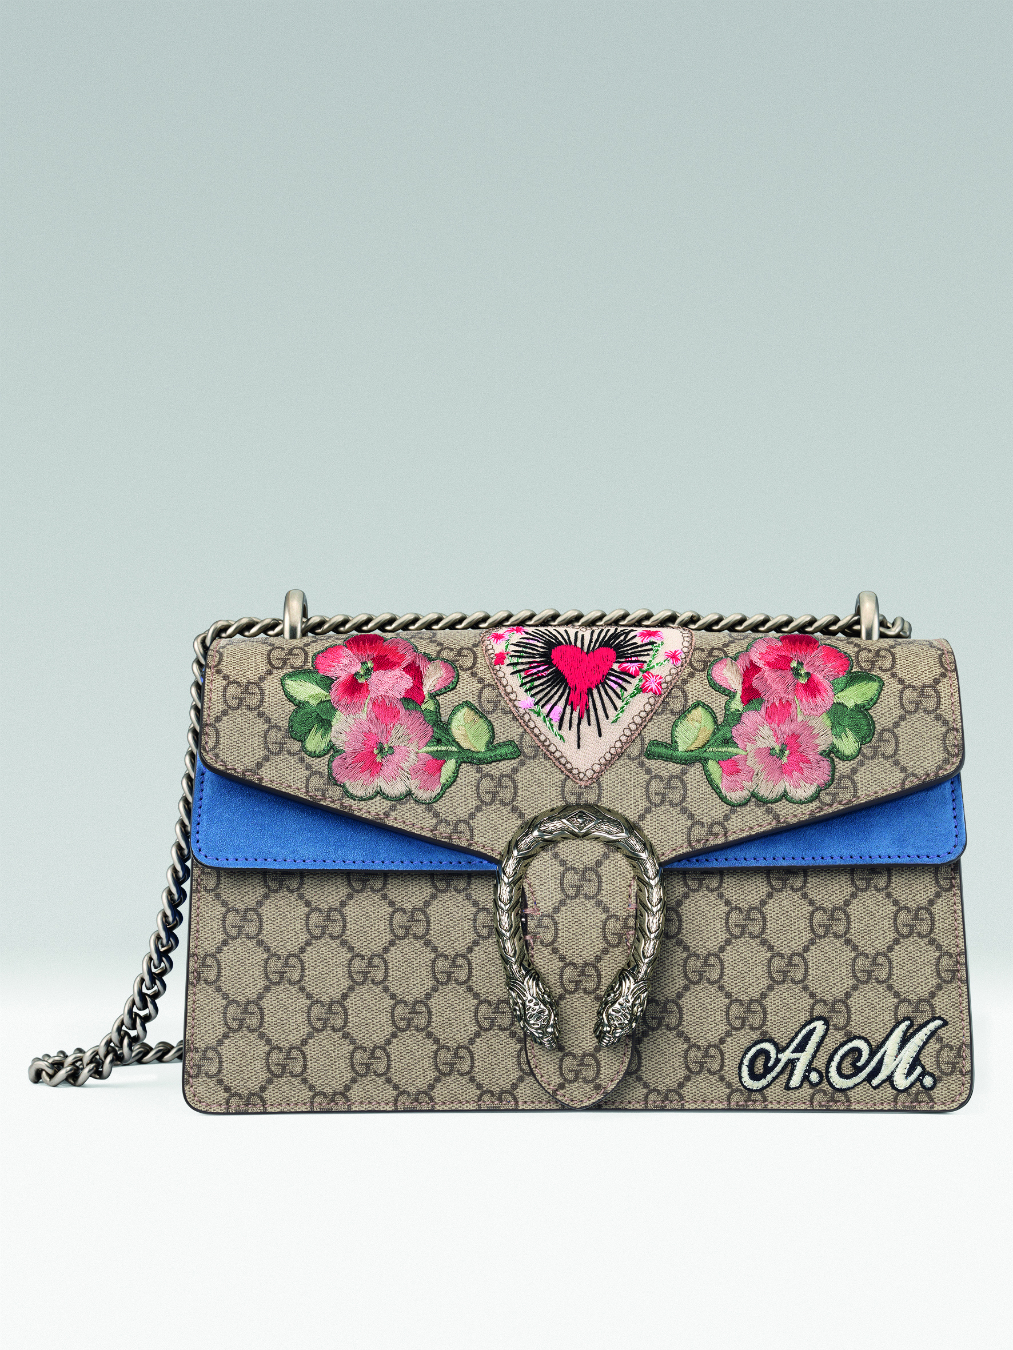 Gucci Dionysus small shoulder bag first impressions and what fits in her 